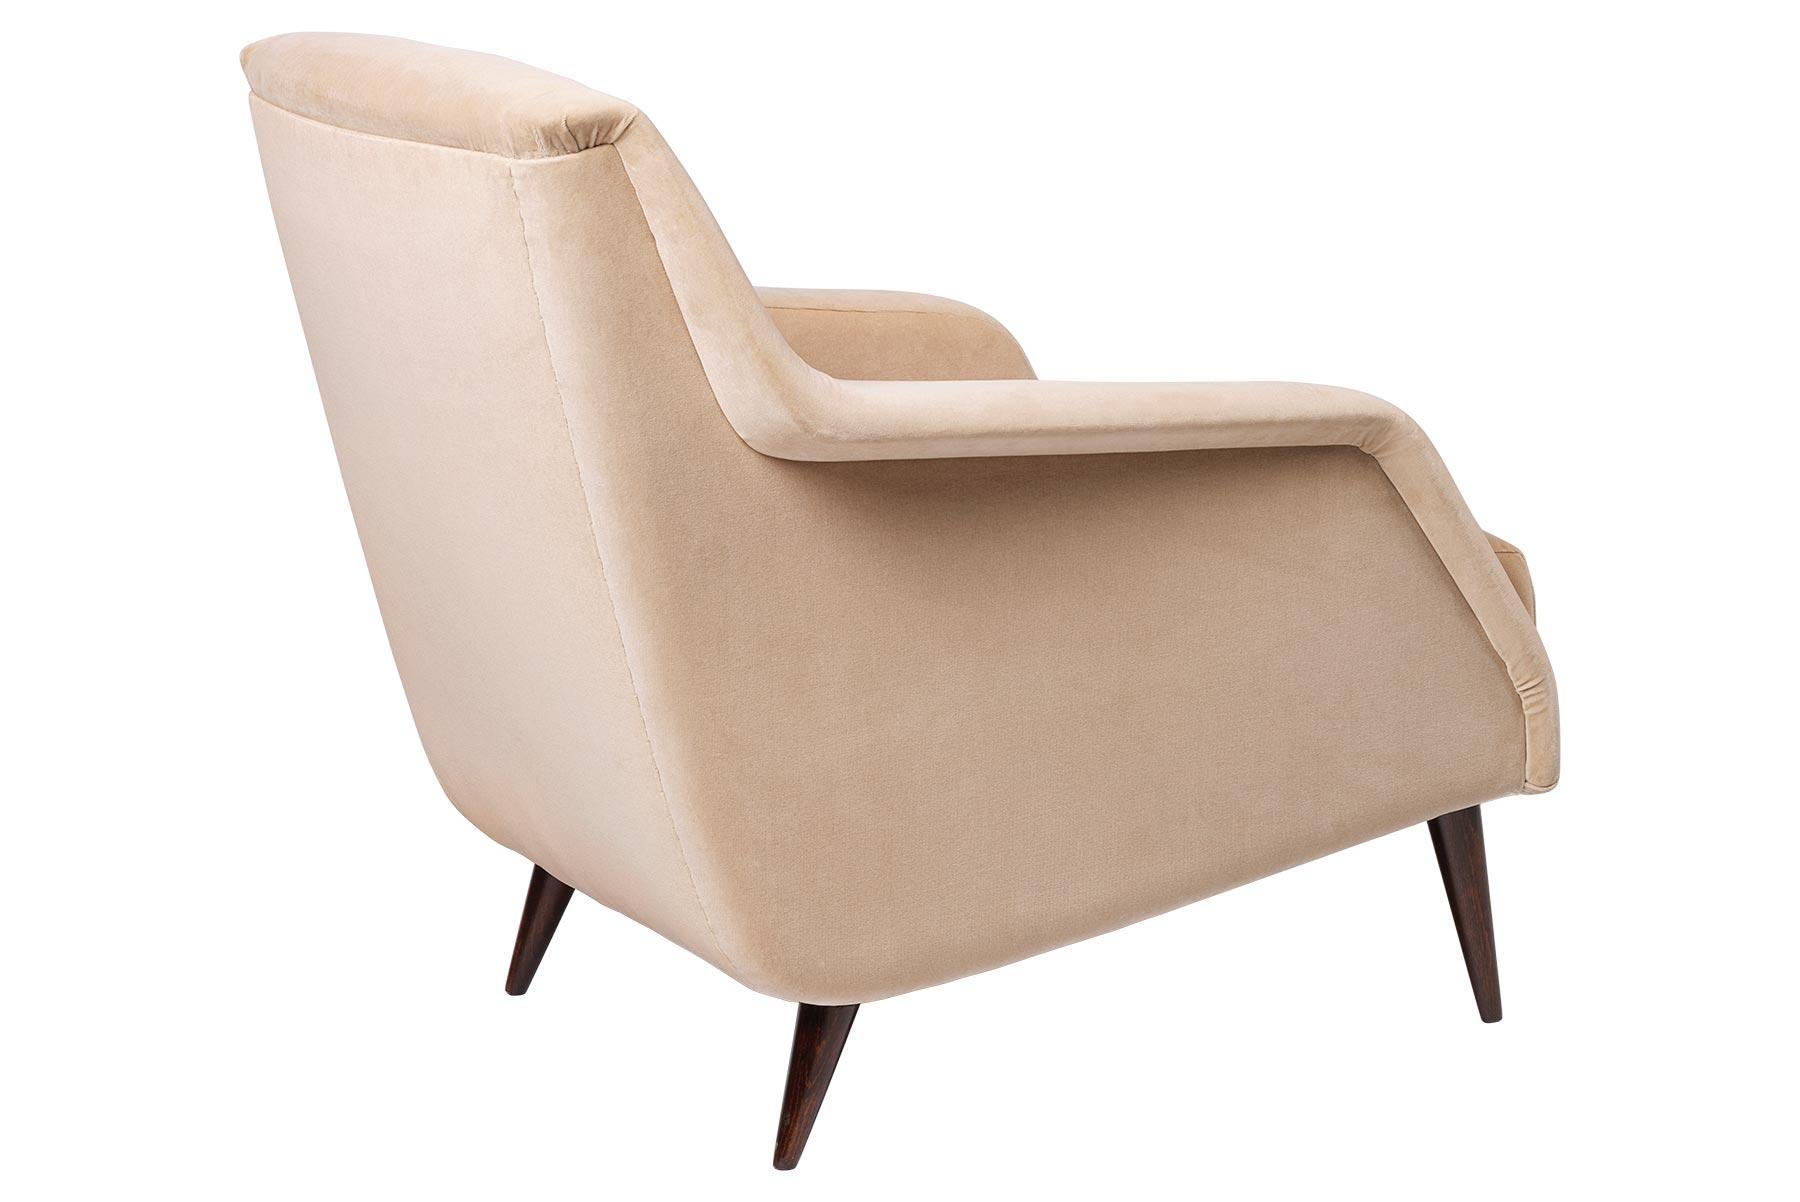 CDC.1 lounge chair was designed by Carlo De Carli in 1954 and features the elegantly minimalist design style, typical of the era. The CDC.1 lounge chair meets the ground in a graceful and slender way; its arms swooping like wings, giving the